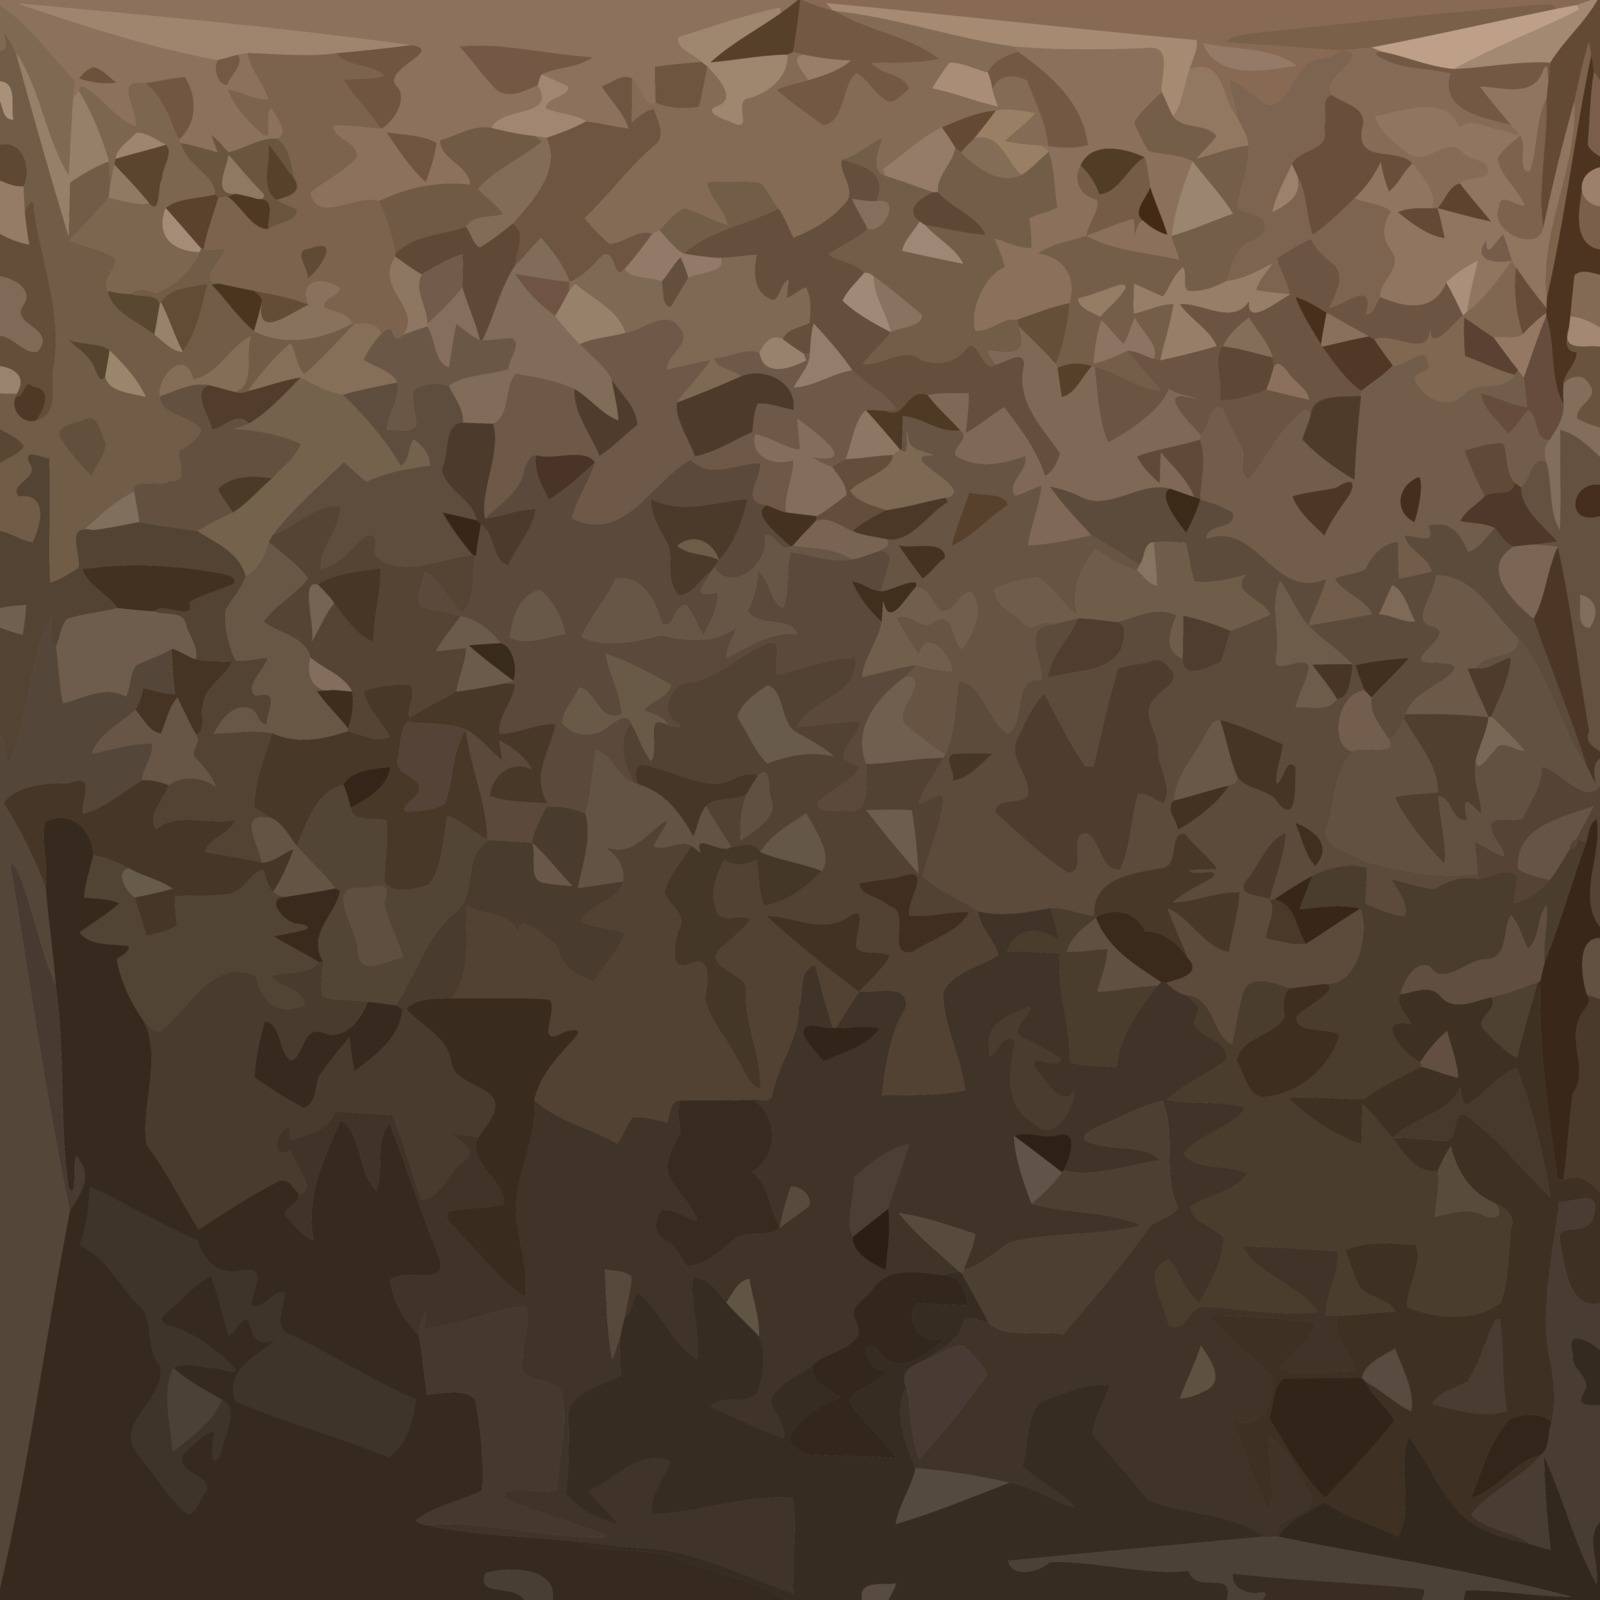 Low polygon style illustration of an antique brass camo abstract geometric background.